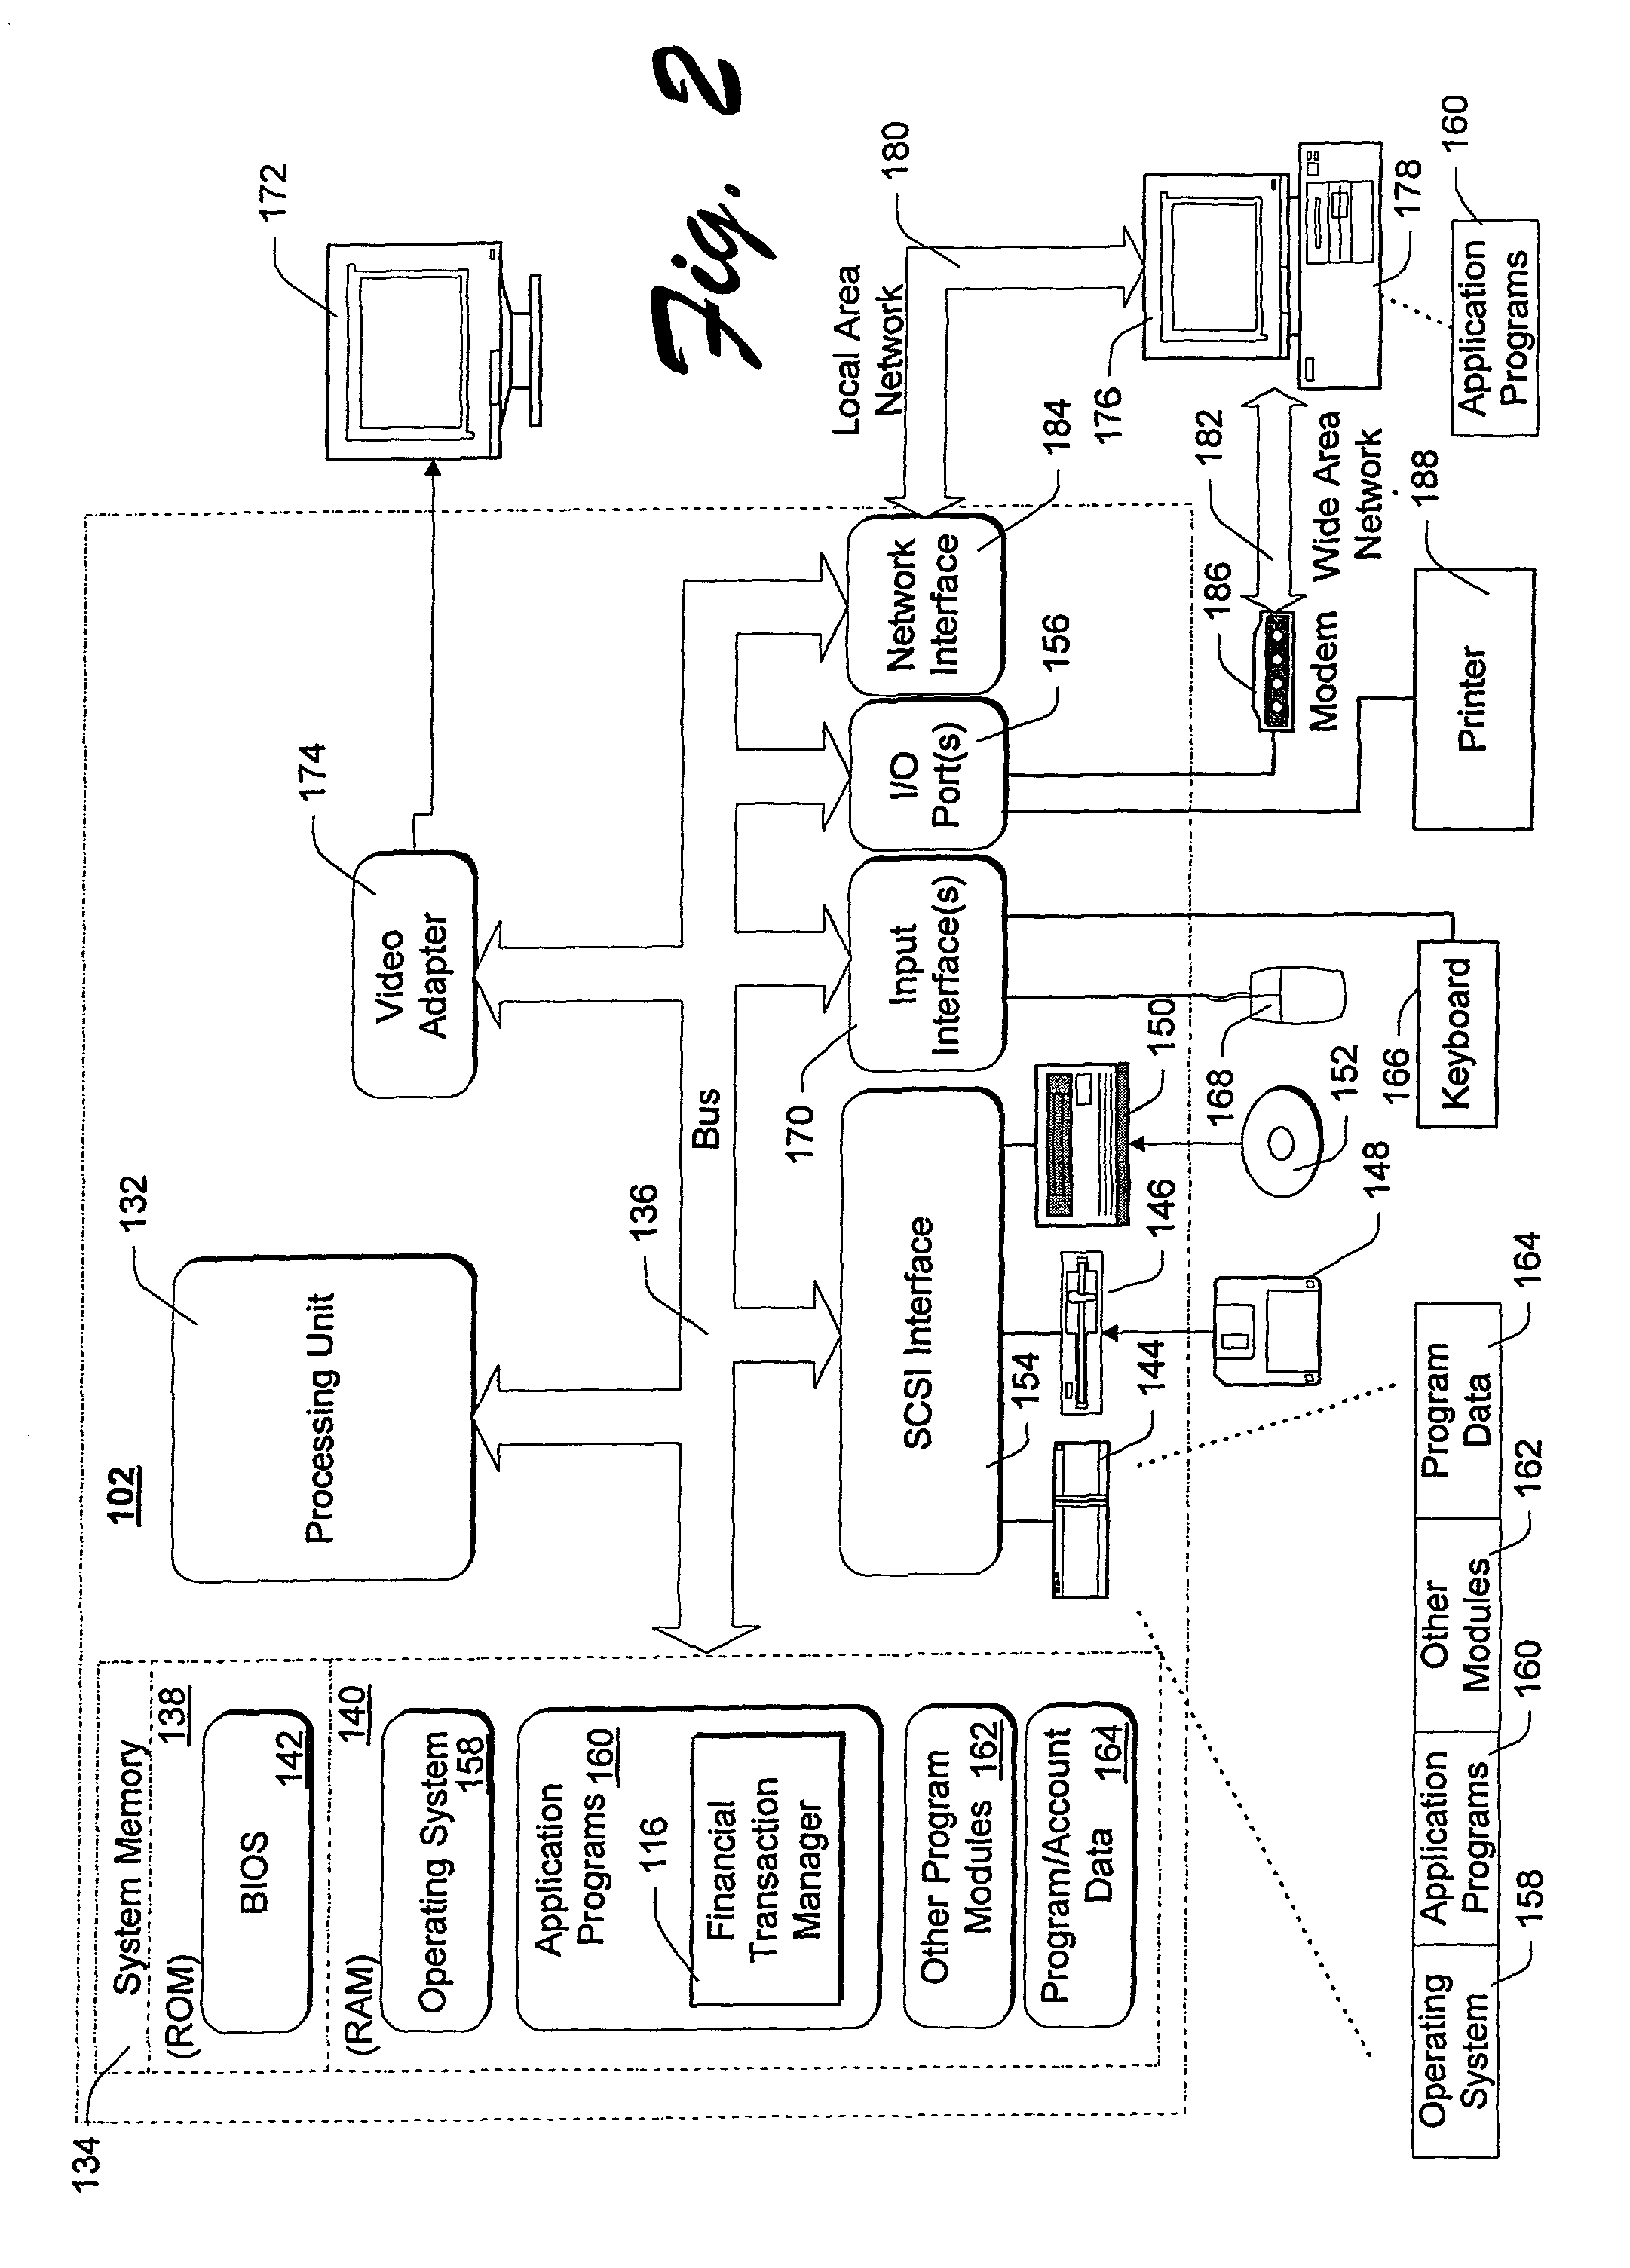 System and method for secure distribution of information via email